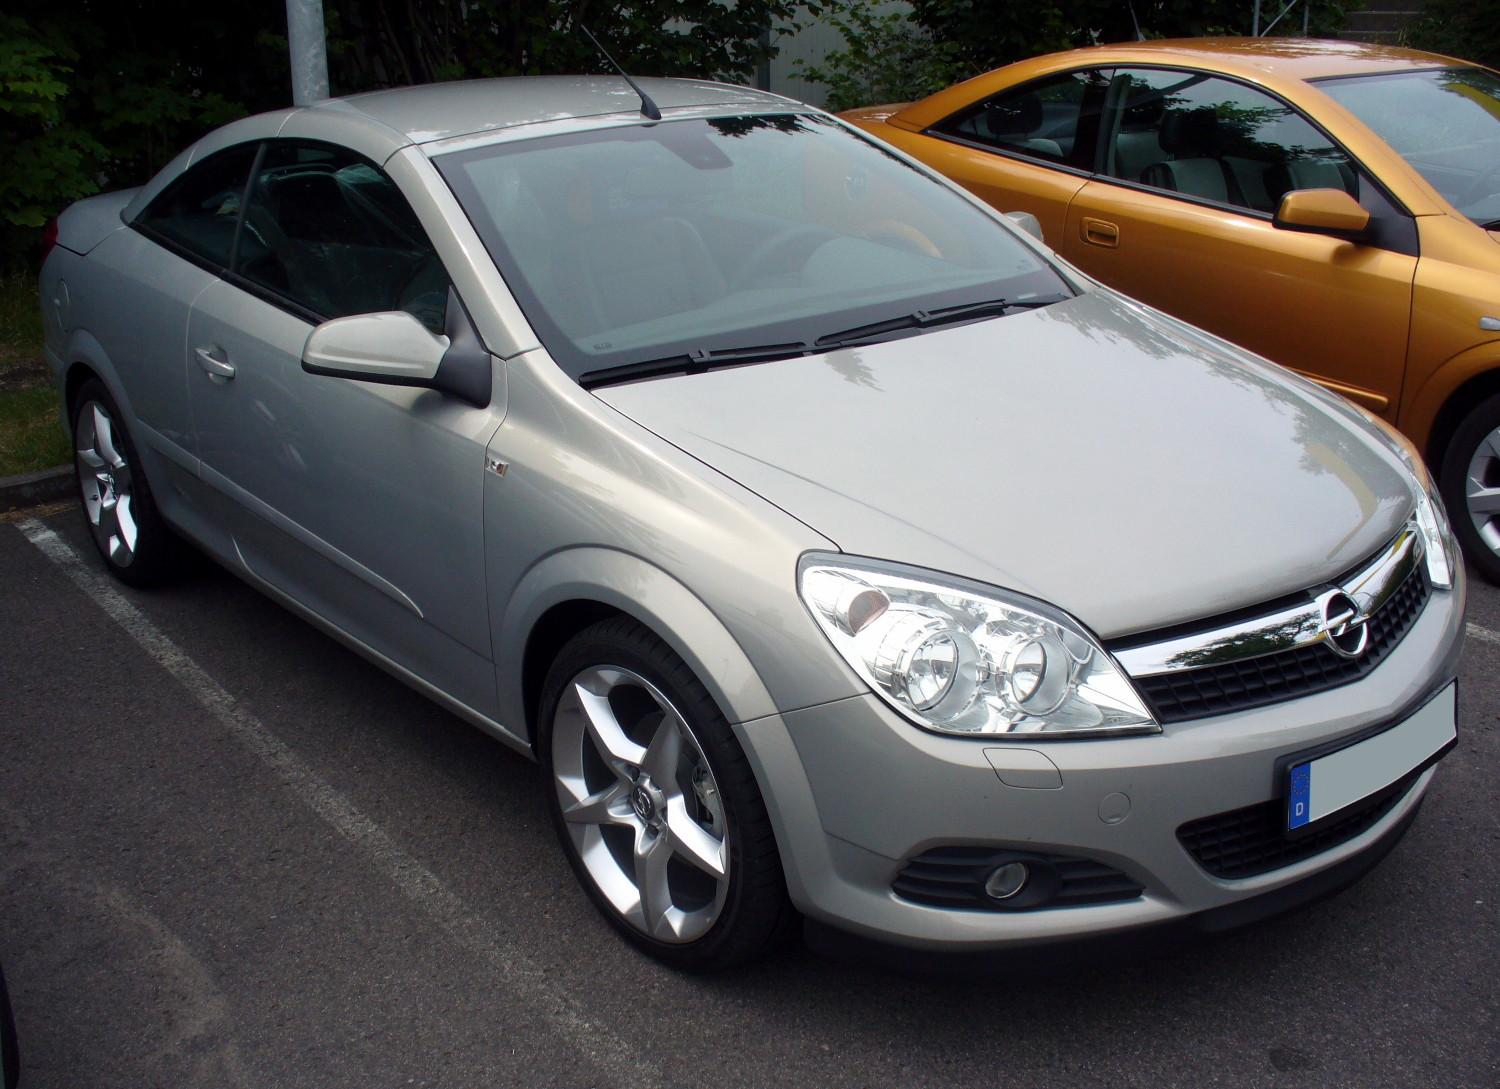 Opel astra twintop 1.8. Photos and comments. www.picautos.com 2019